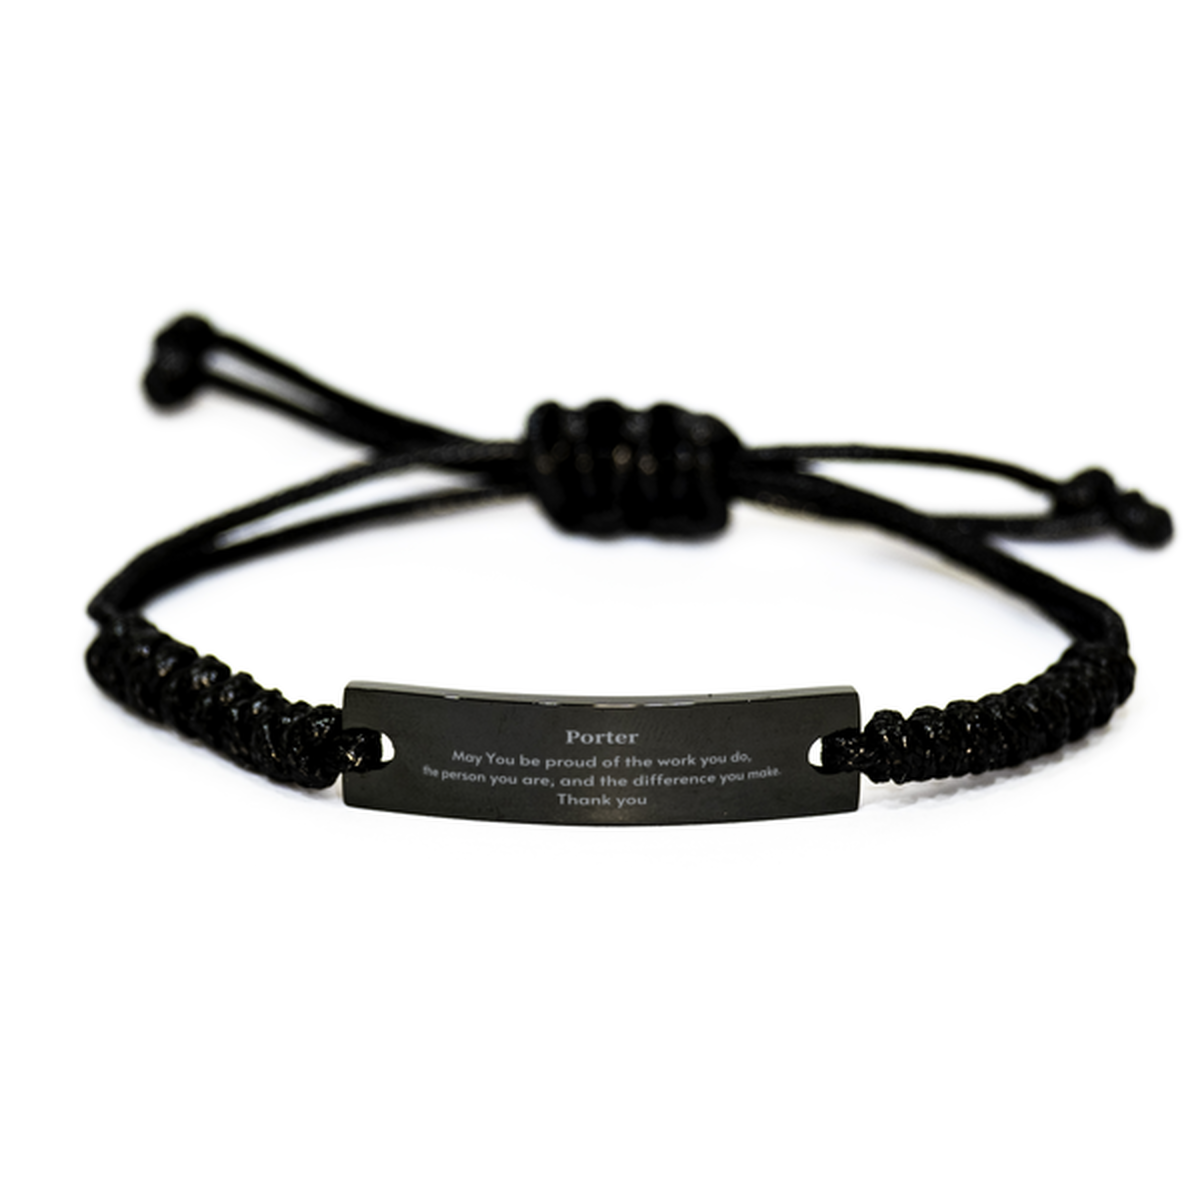 Heartwarming Black Rope Bracelet Retirement Coworkers Gifts for Porter, Porter May You be proud of the work you do, the person you are Gifts for Boss Men Women Friends